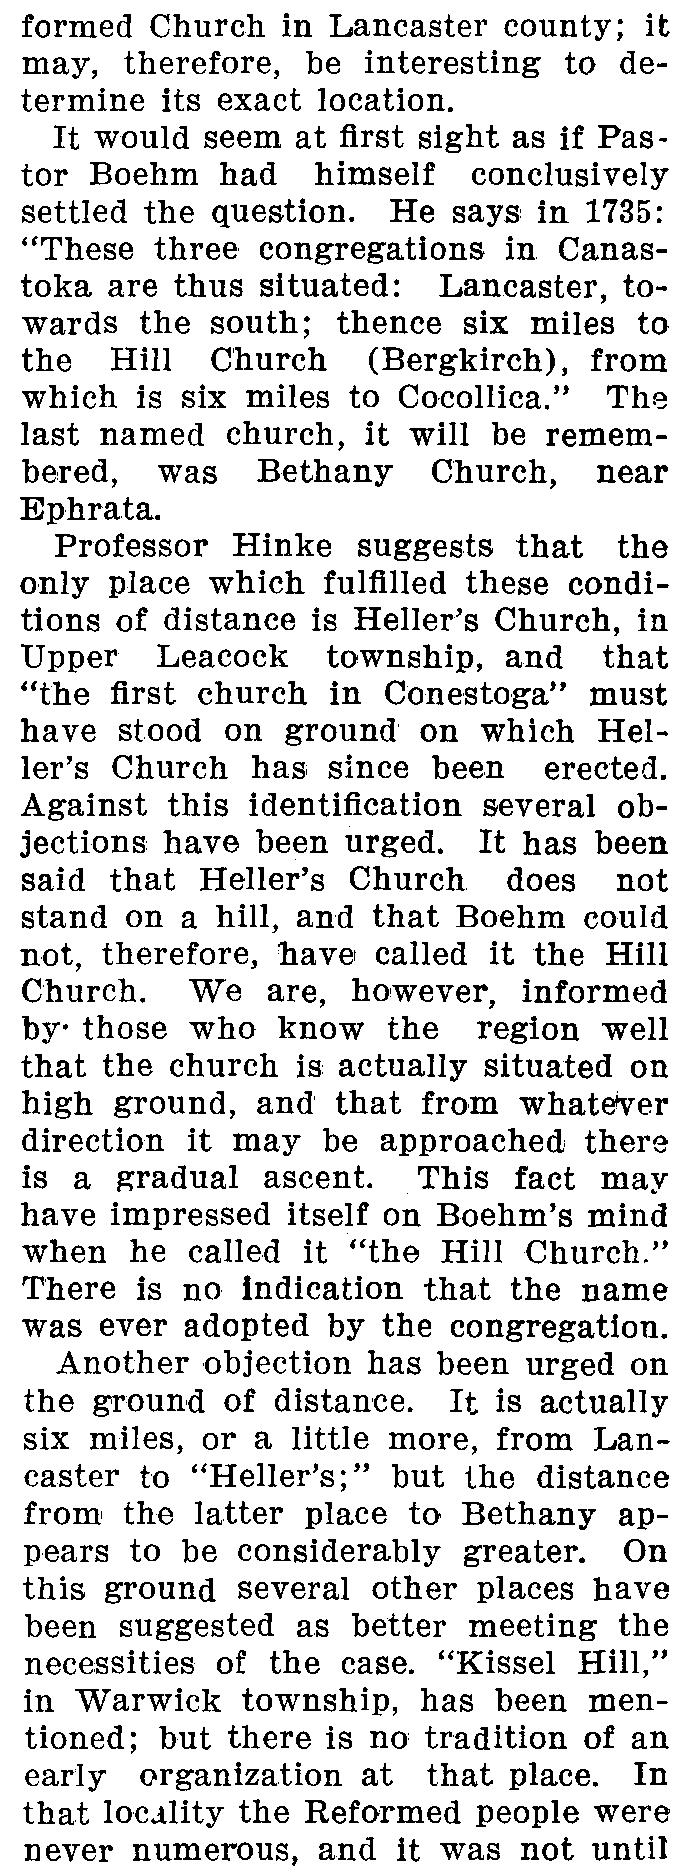 formed Church in Lancaster county; it may, therefore, be interesting to determine its exact location. It would seem at first sight as if Pastor Boehm had himself conclusively settled the question.